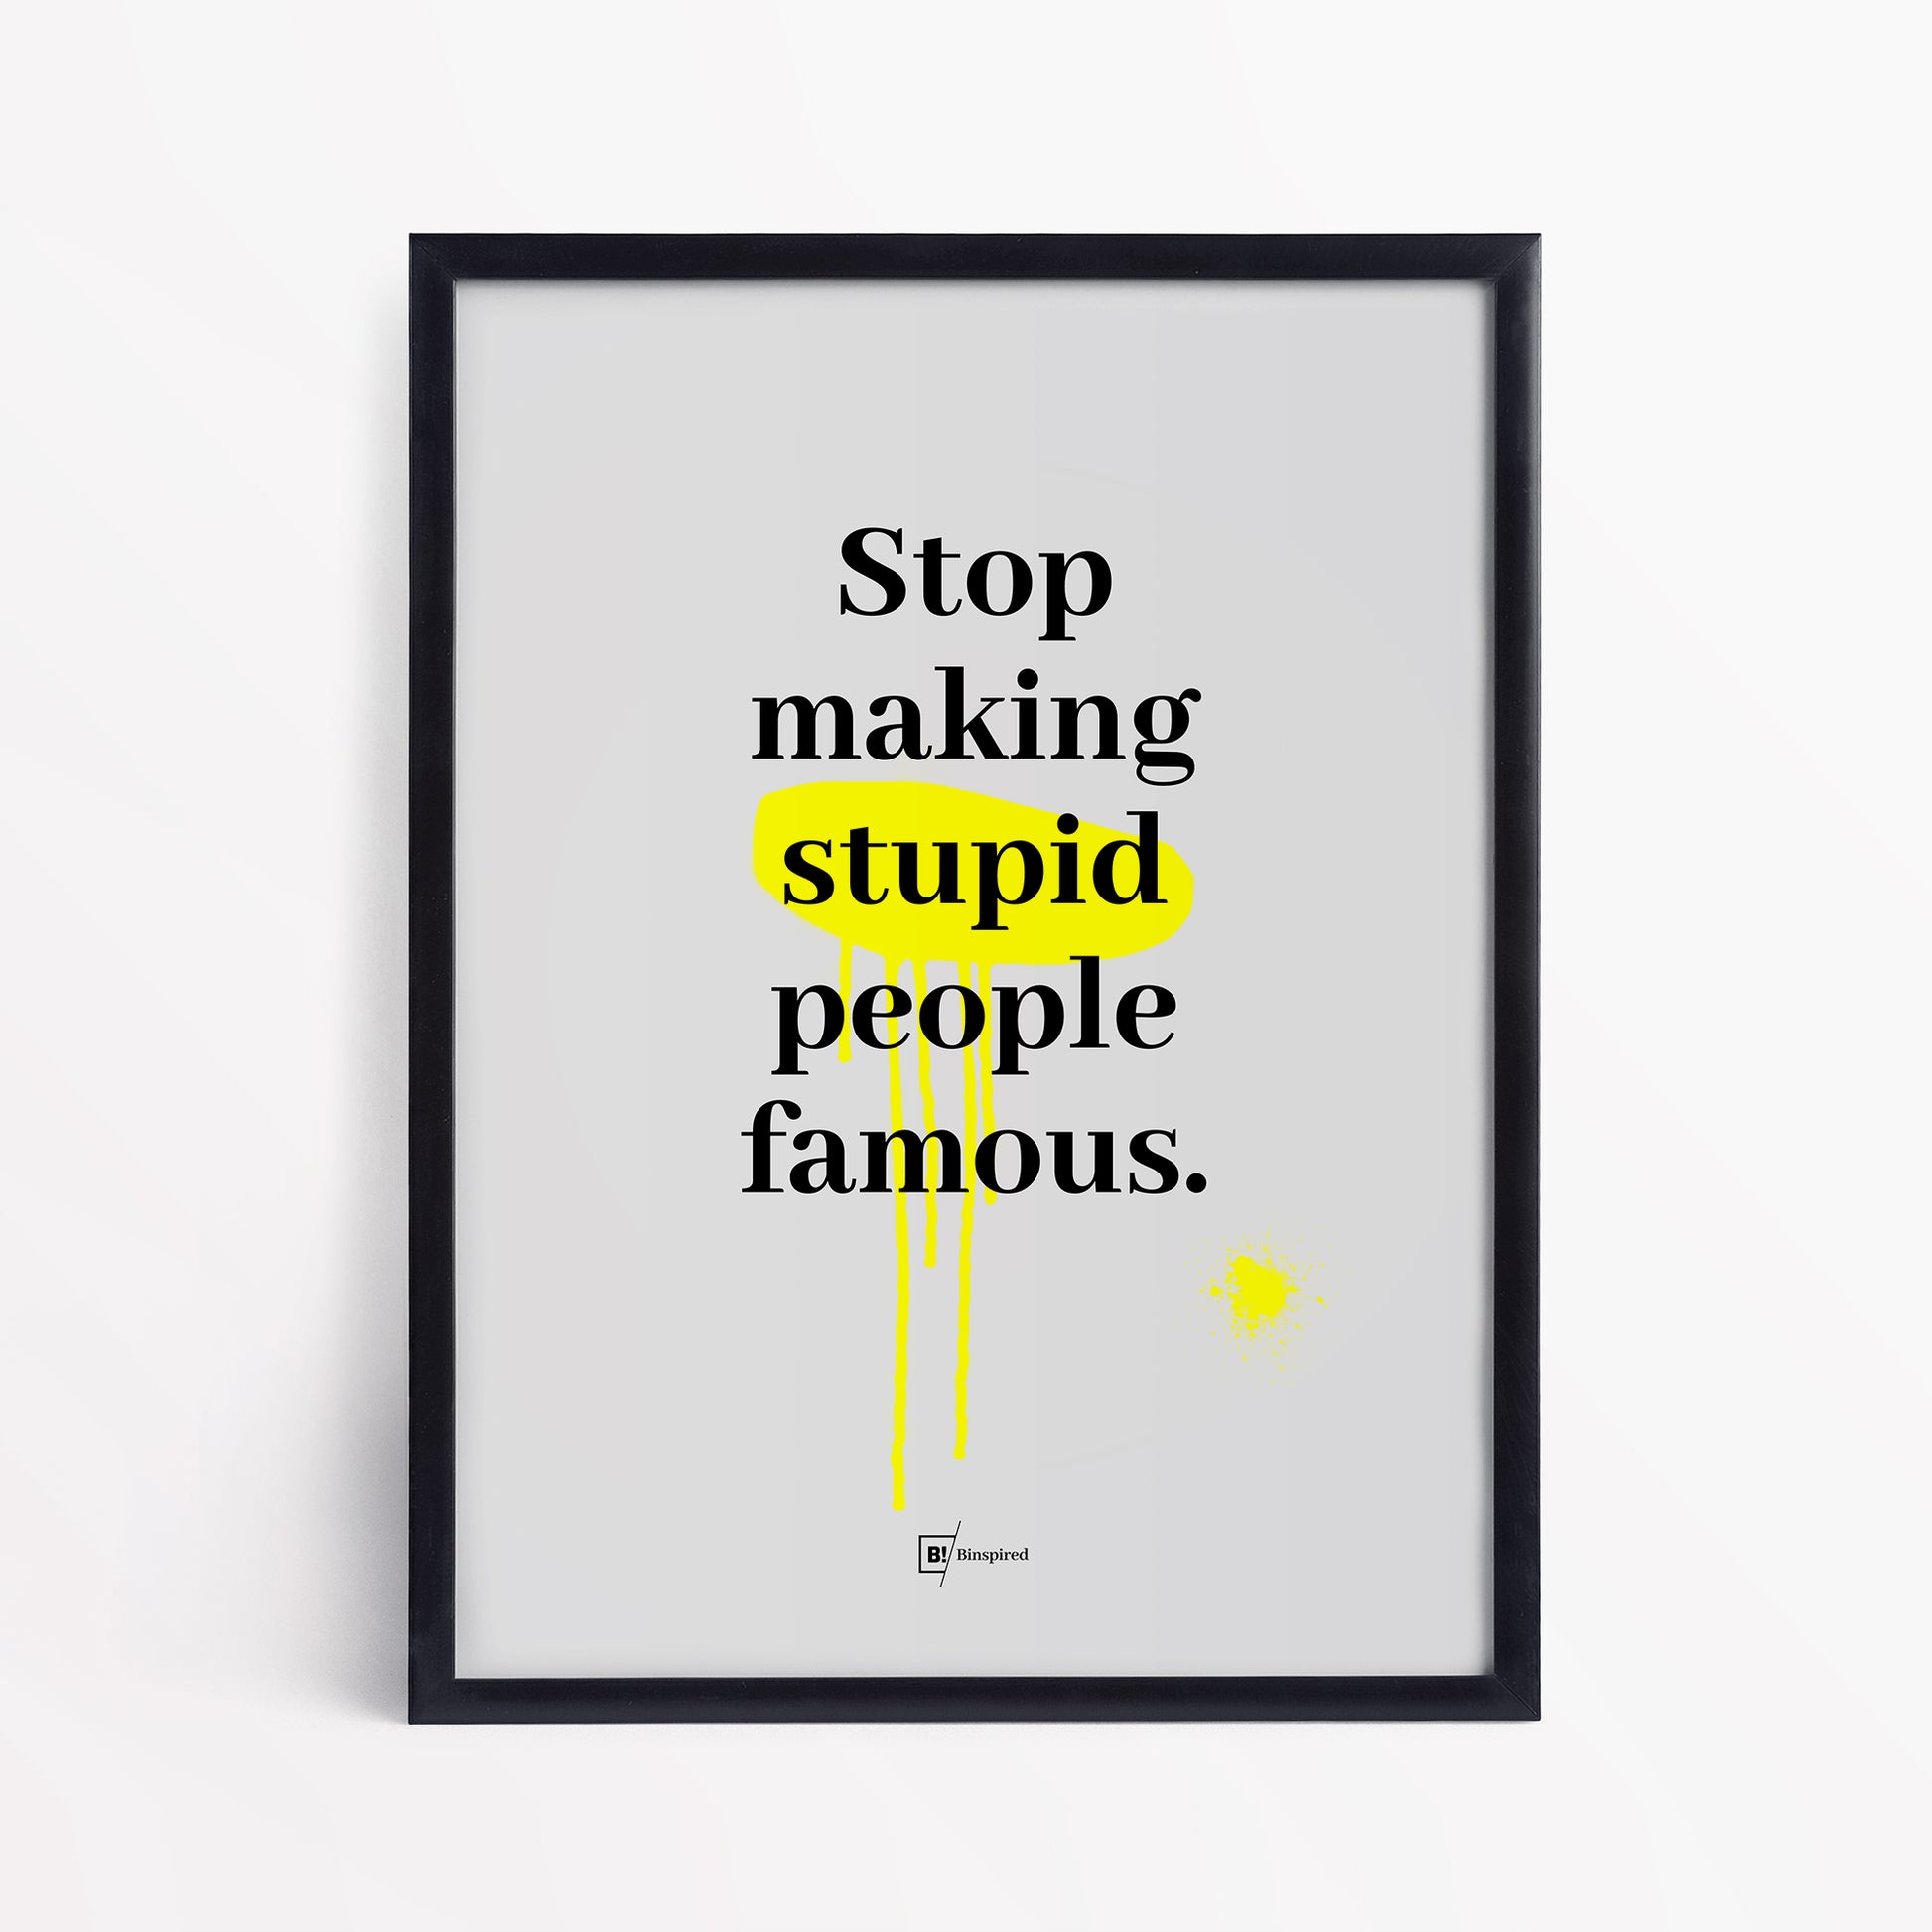 Be inspired by our "Stop making stupid people famous" quote art print! This artwork was printed using the giclée process on archival acid-free paper and is presented in a simple black frame that captures its timeless beauty in every detail.